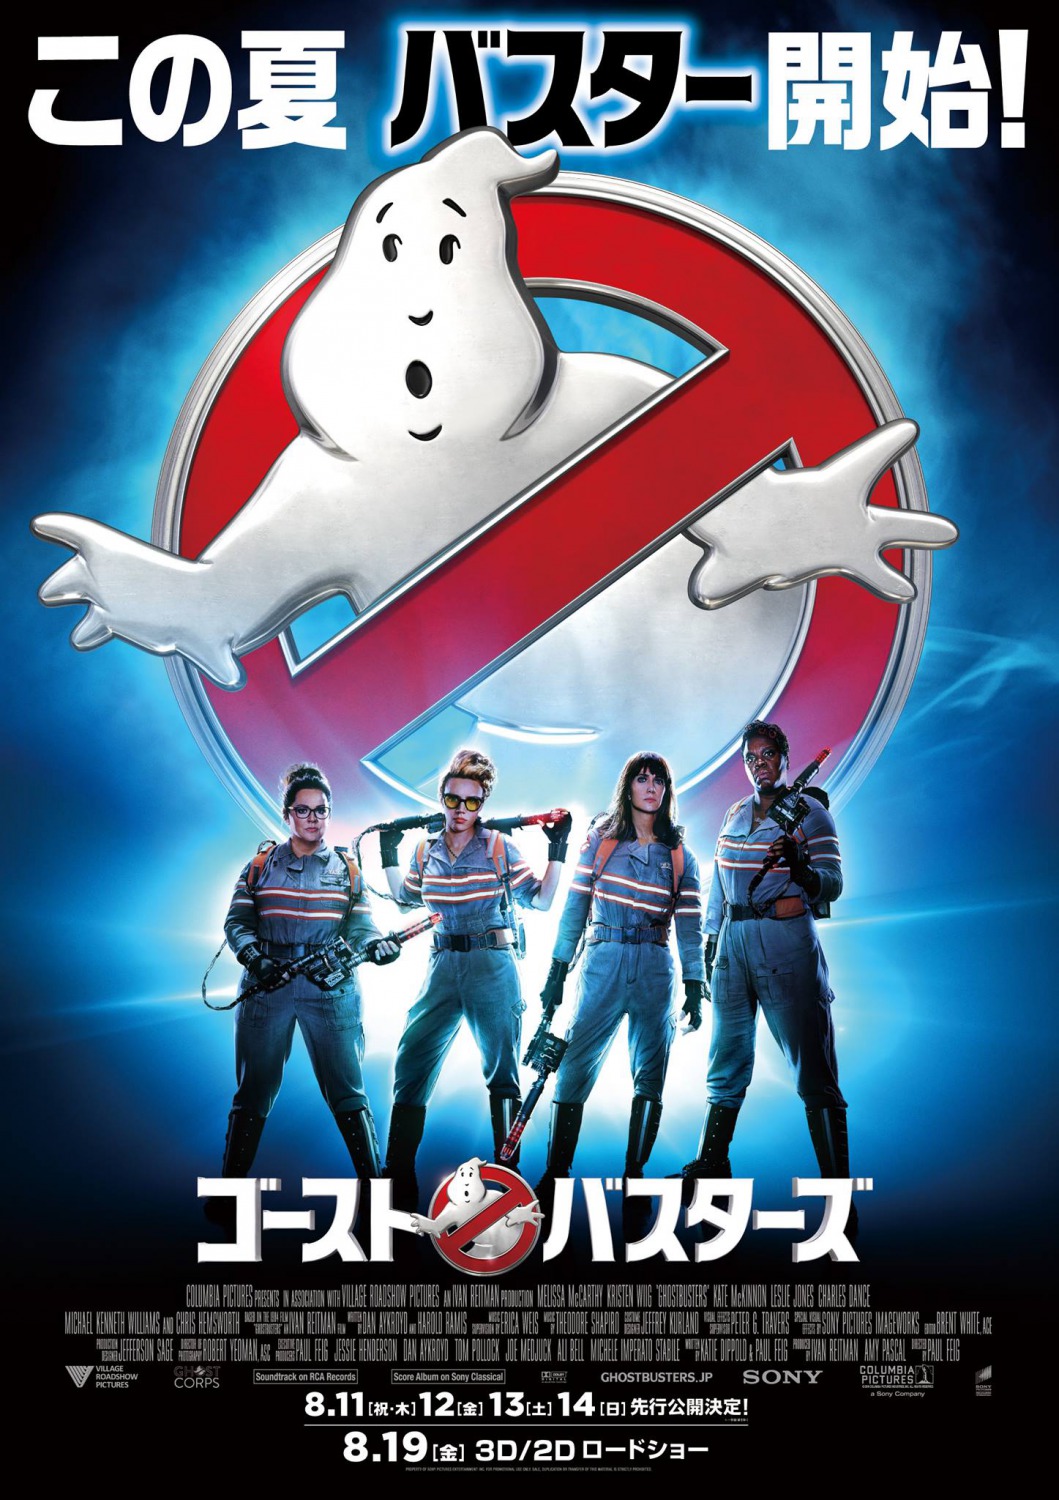 Extra Large Movie Poster Image for Ghostbusters (#10 of 17)